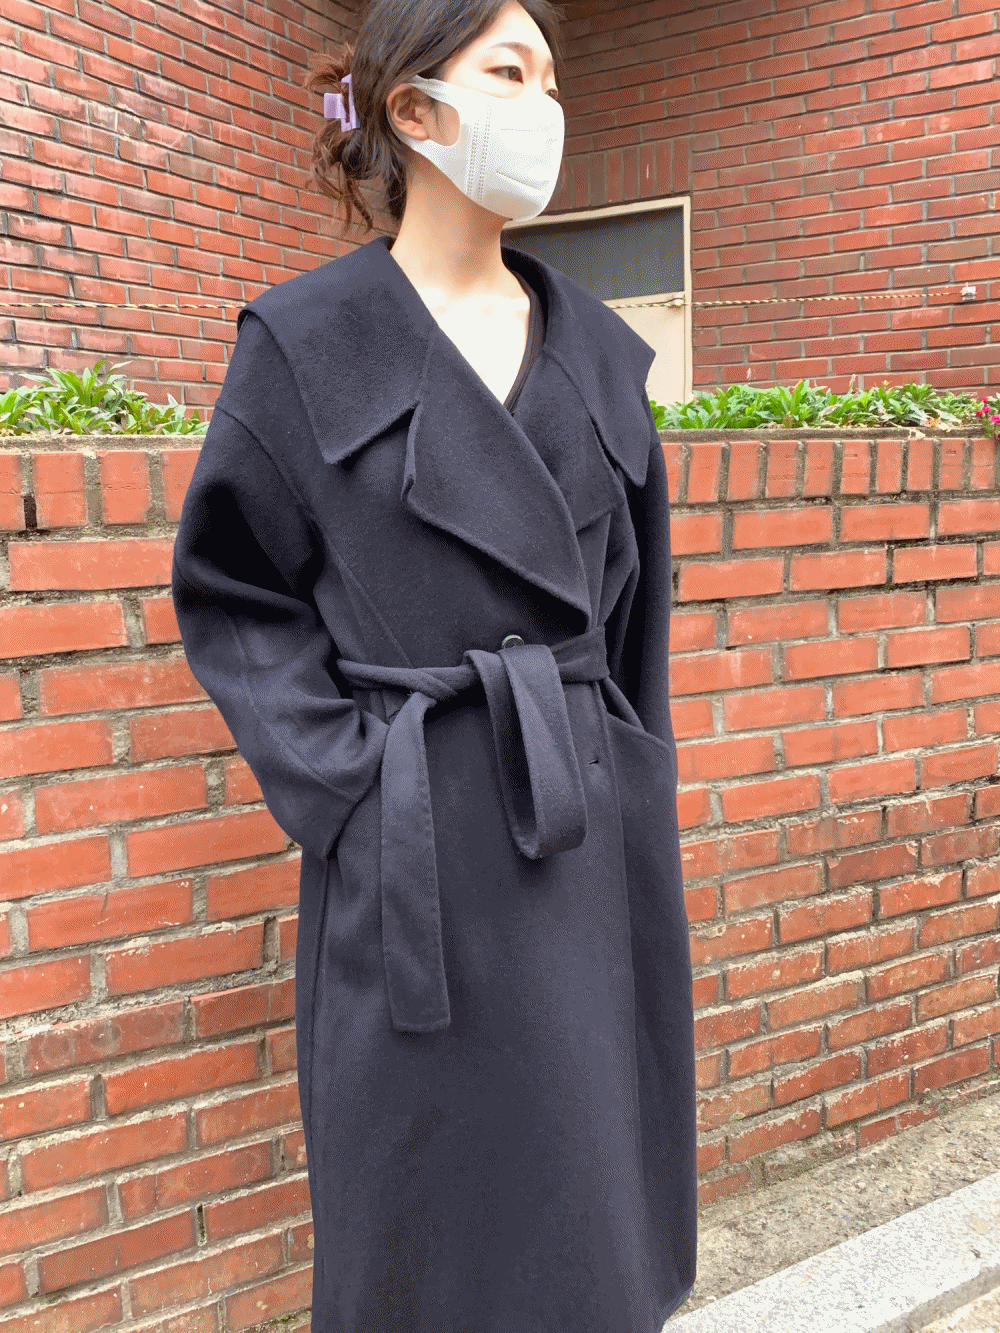 [Outer] [PREMIUM] (울90) Sailor handmade coat / one color